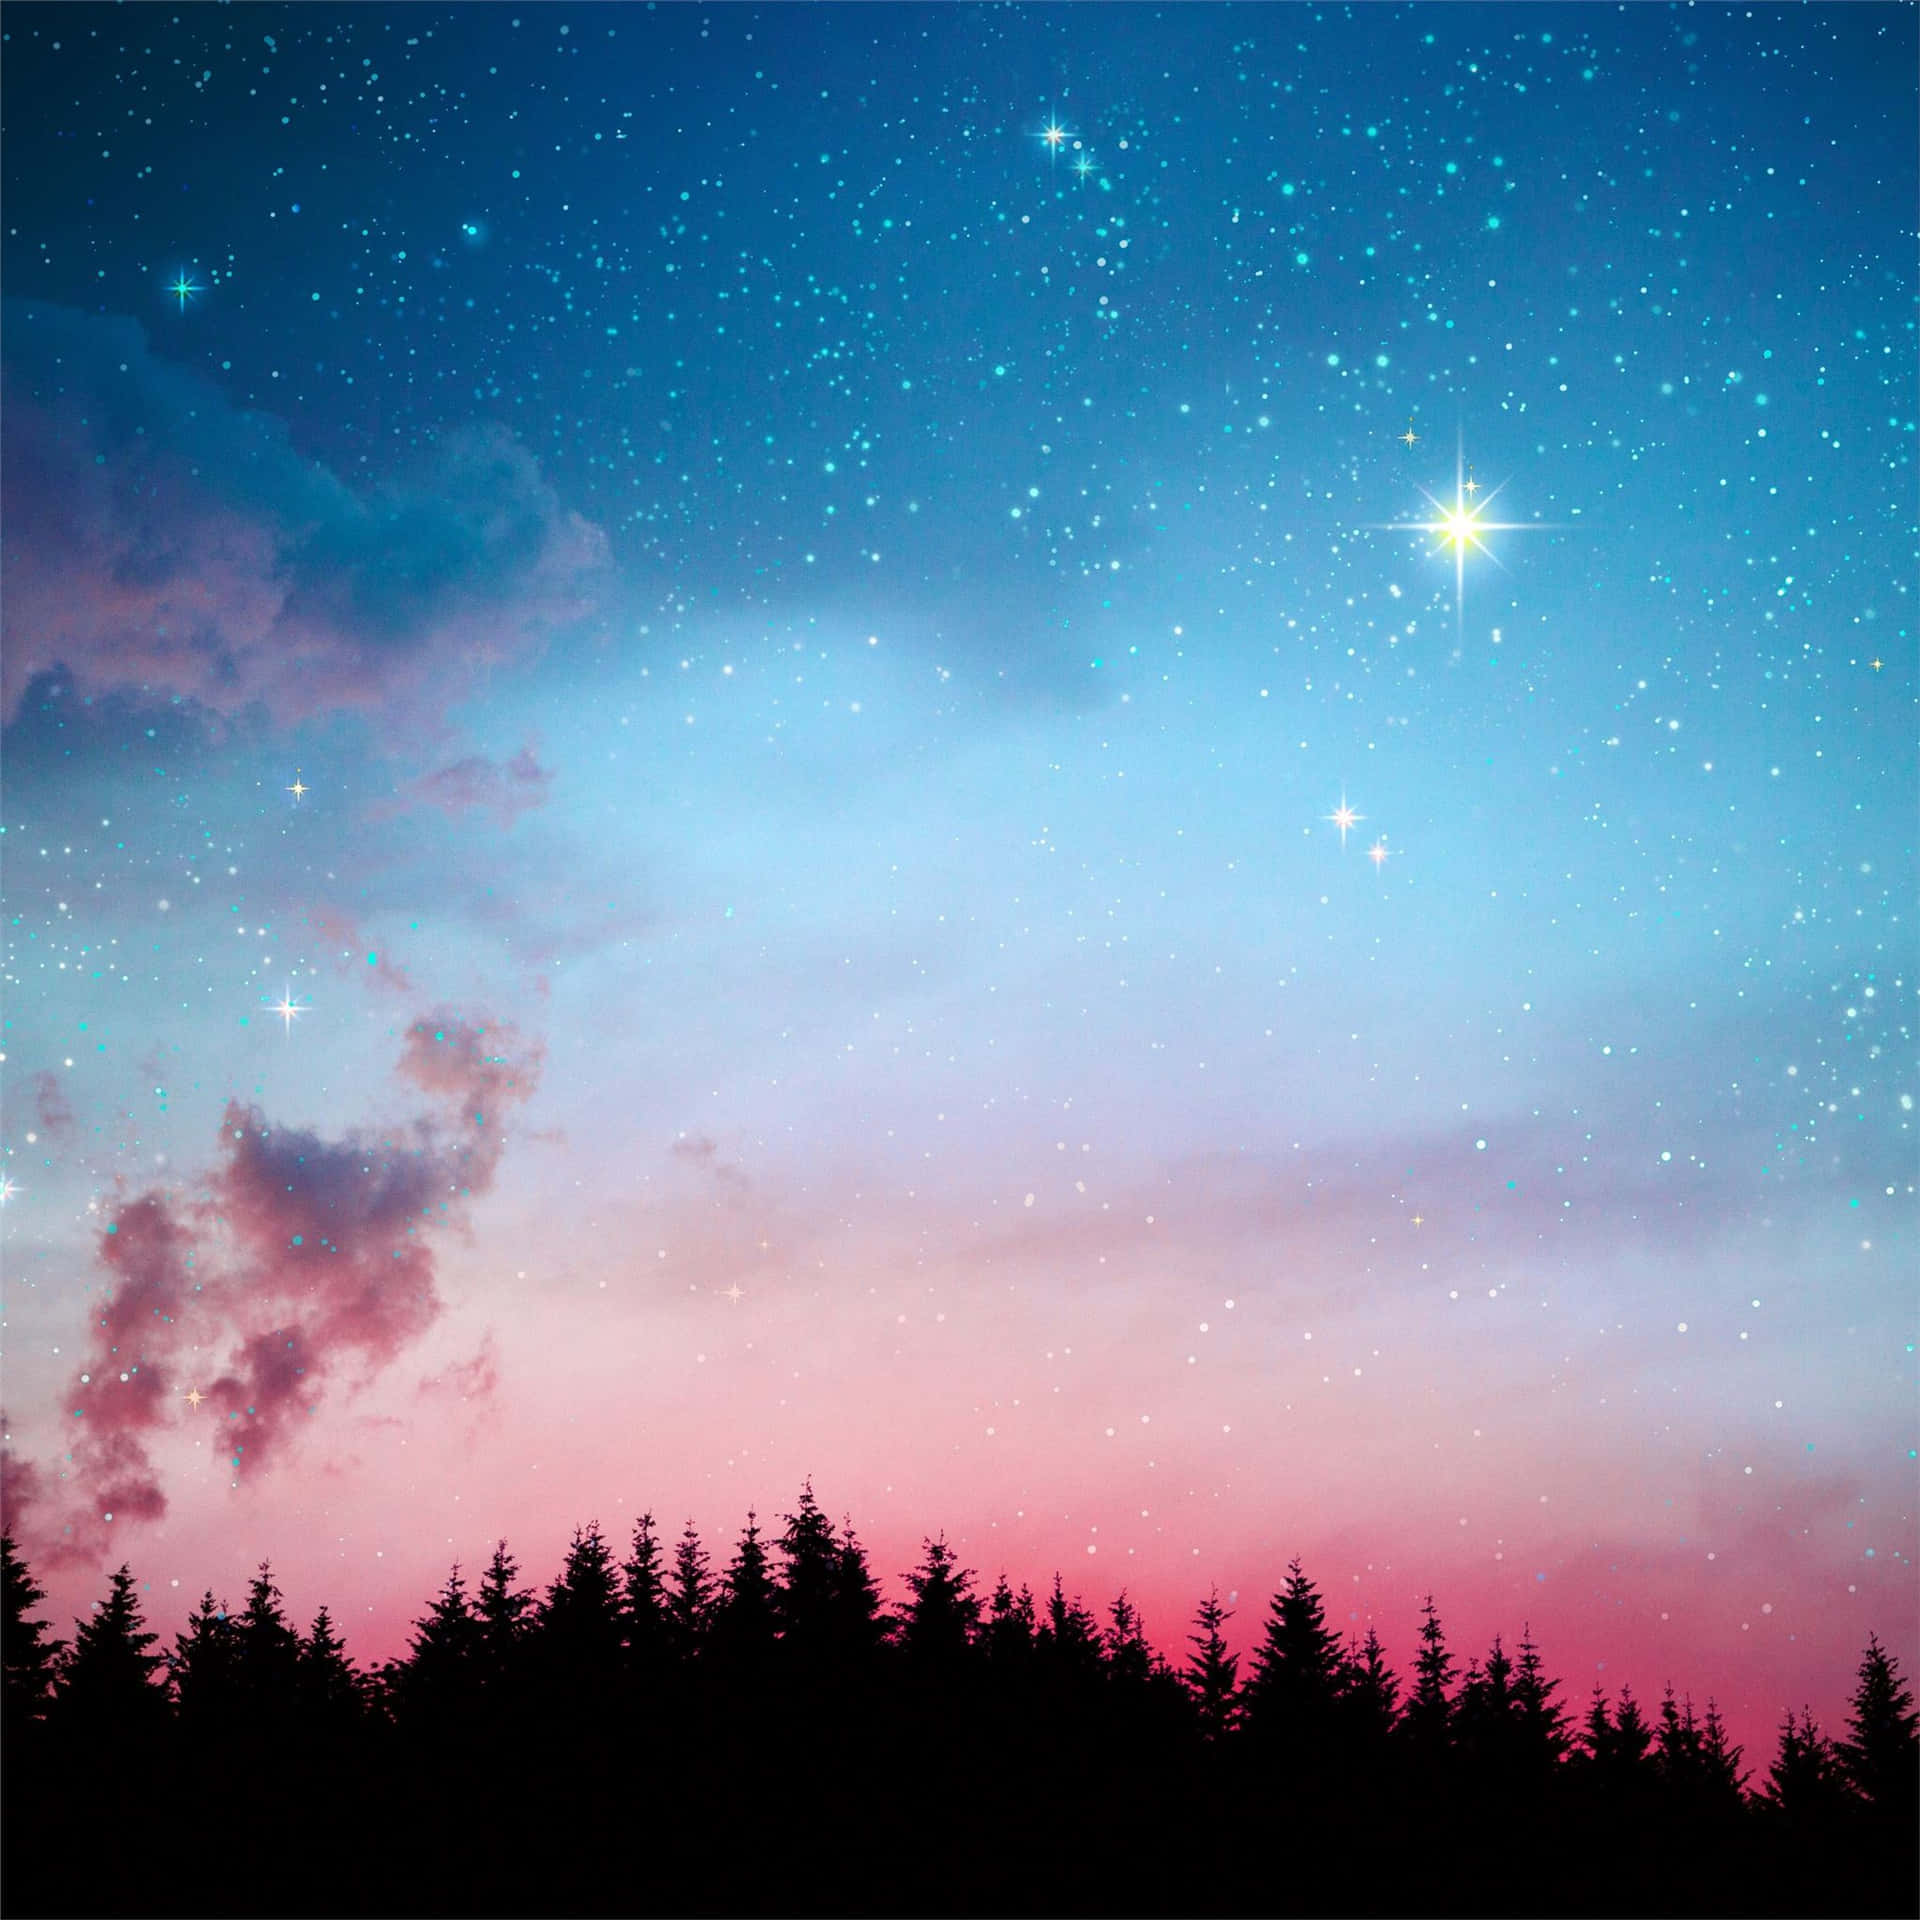 "Welcome to the Starlit Night"—Aesthetic Night Sky